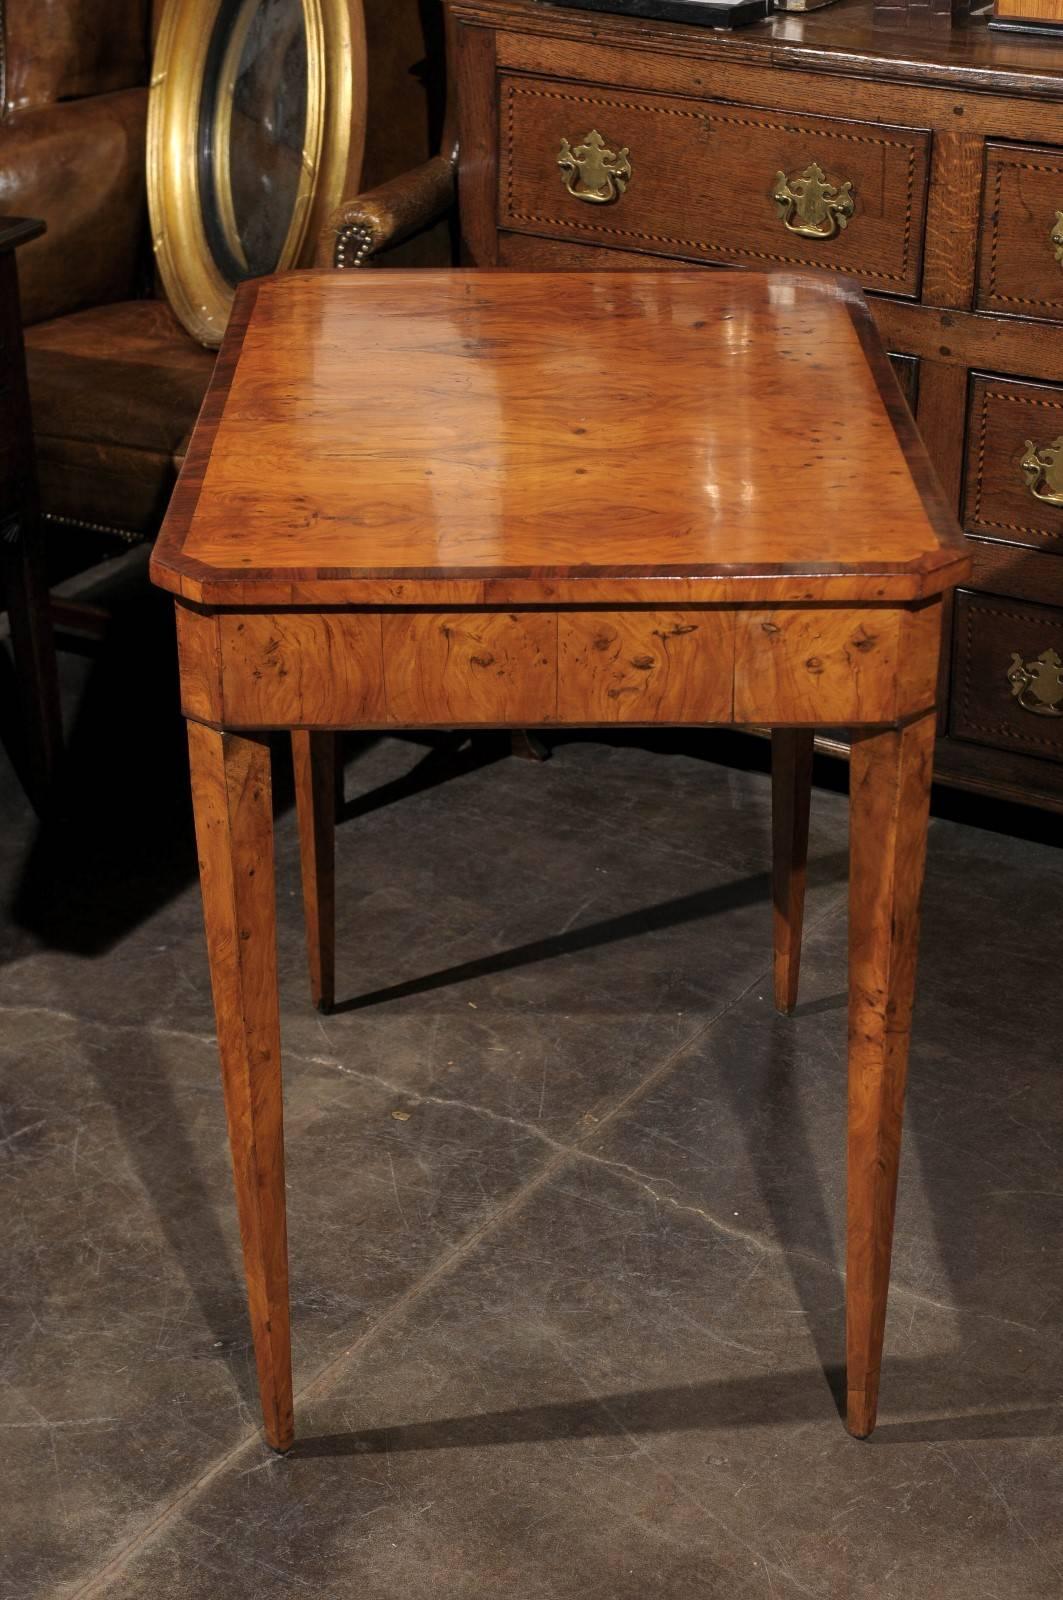 1840s Austrian Biedermeier Table with Contrasting Cross-banded Inlay and Drawer 2